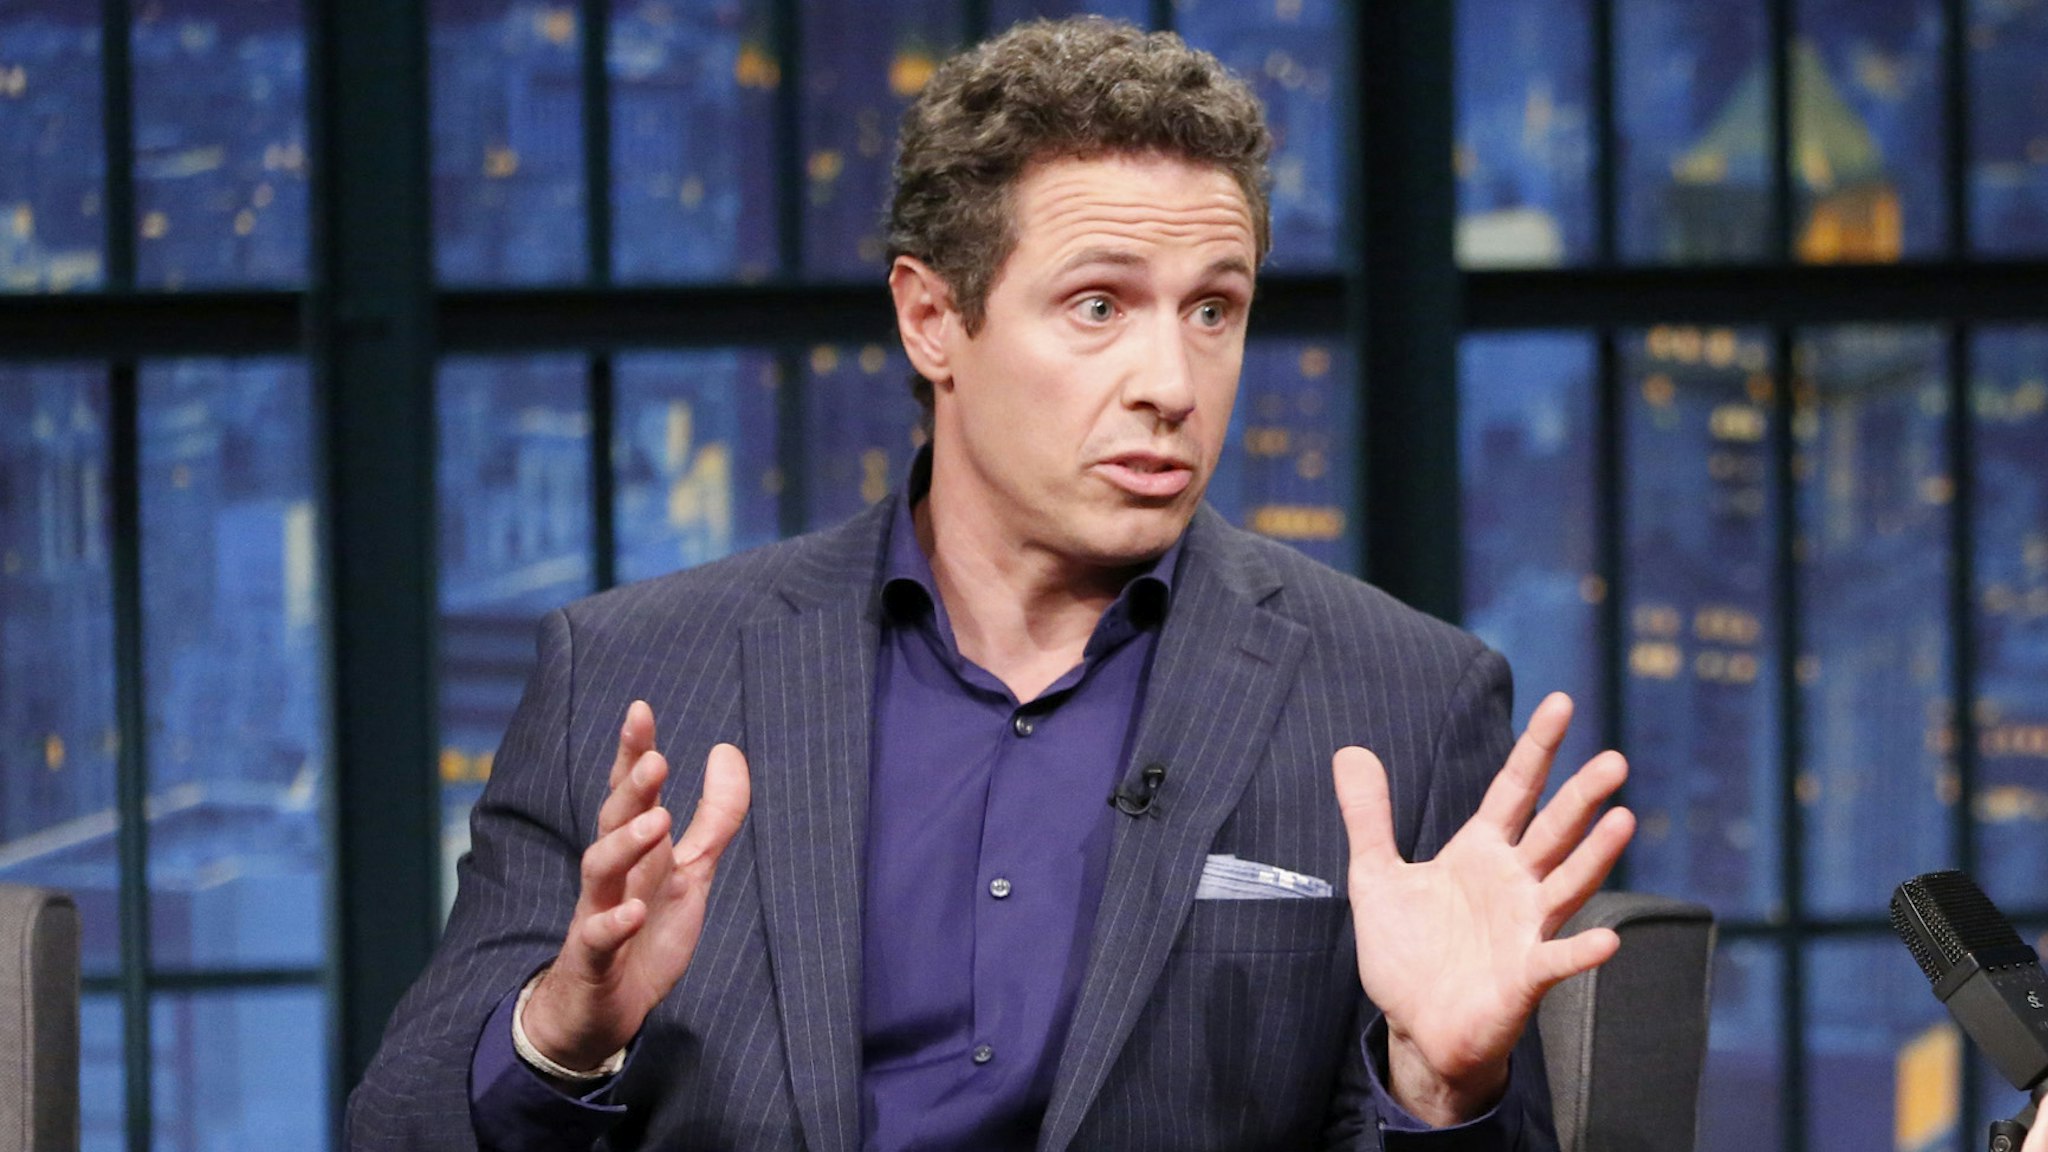 LATE NIGHT WITH SETH MEYERS -- Episode 340 -- Pictured: (l-r) Journalist Chris Cuomo during an interview with host Seth Meyers on March 15, 2016